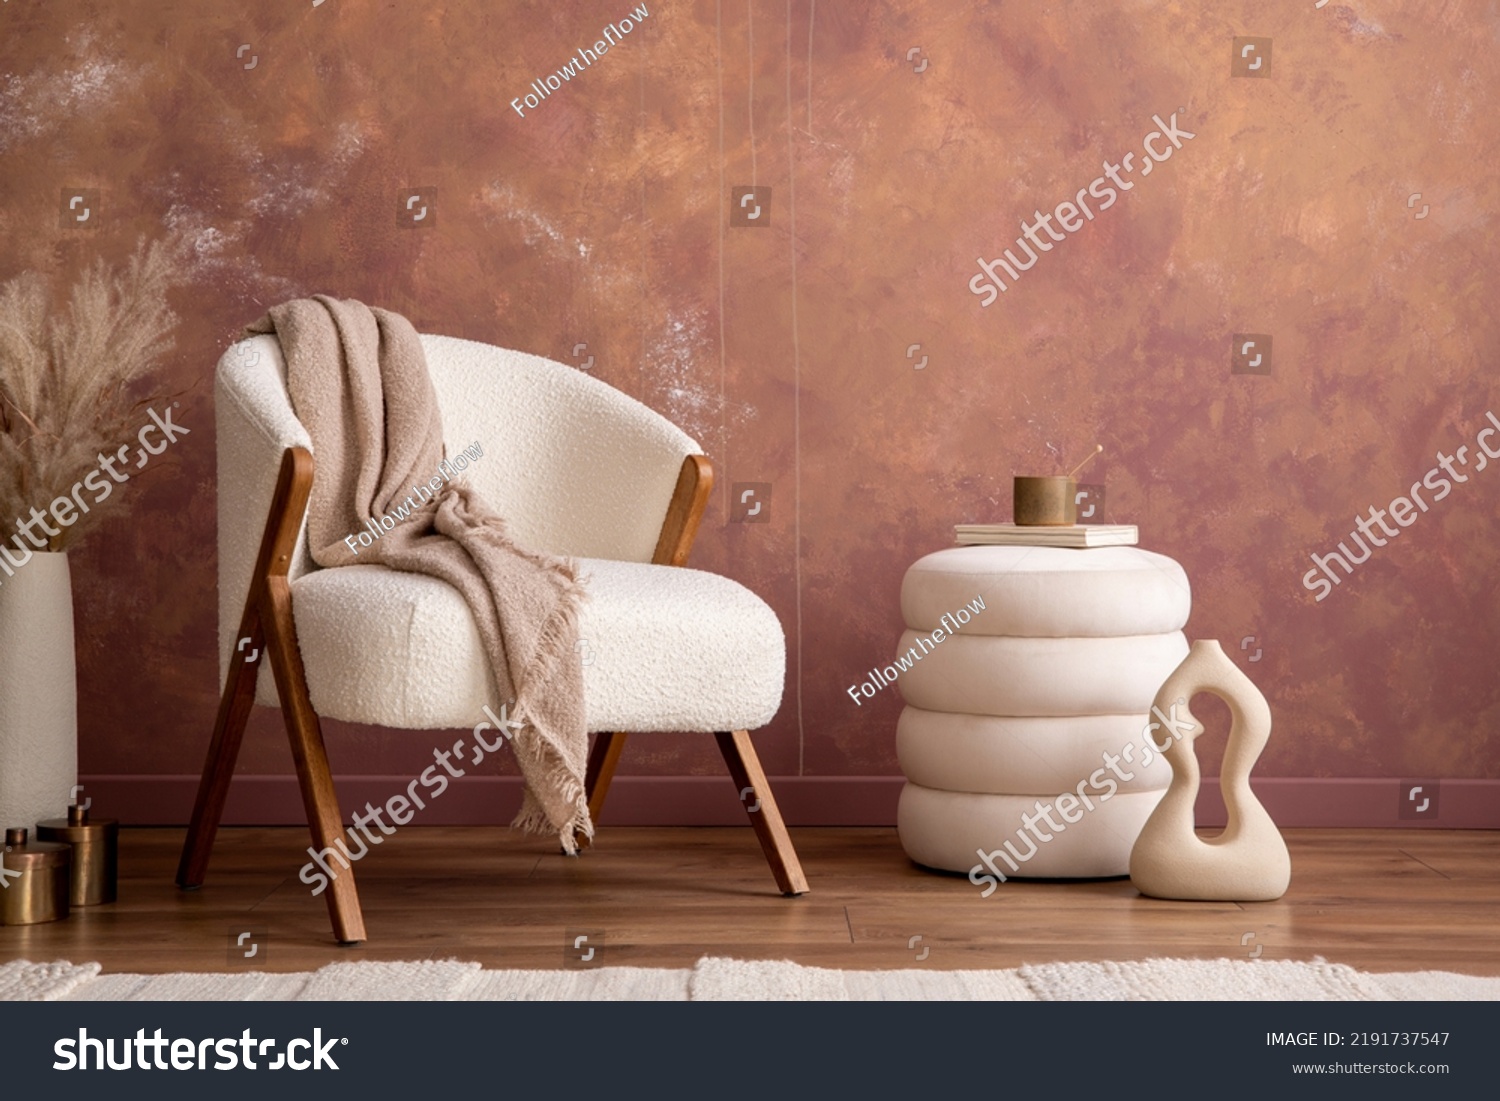 Interior design of aesthetic and elegant room with white boucle armchair, modern pouf, vase with dried flowers and personal accessories. Stylish home decor. Template. Copy space. Grunge wall.  #2191737547